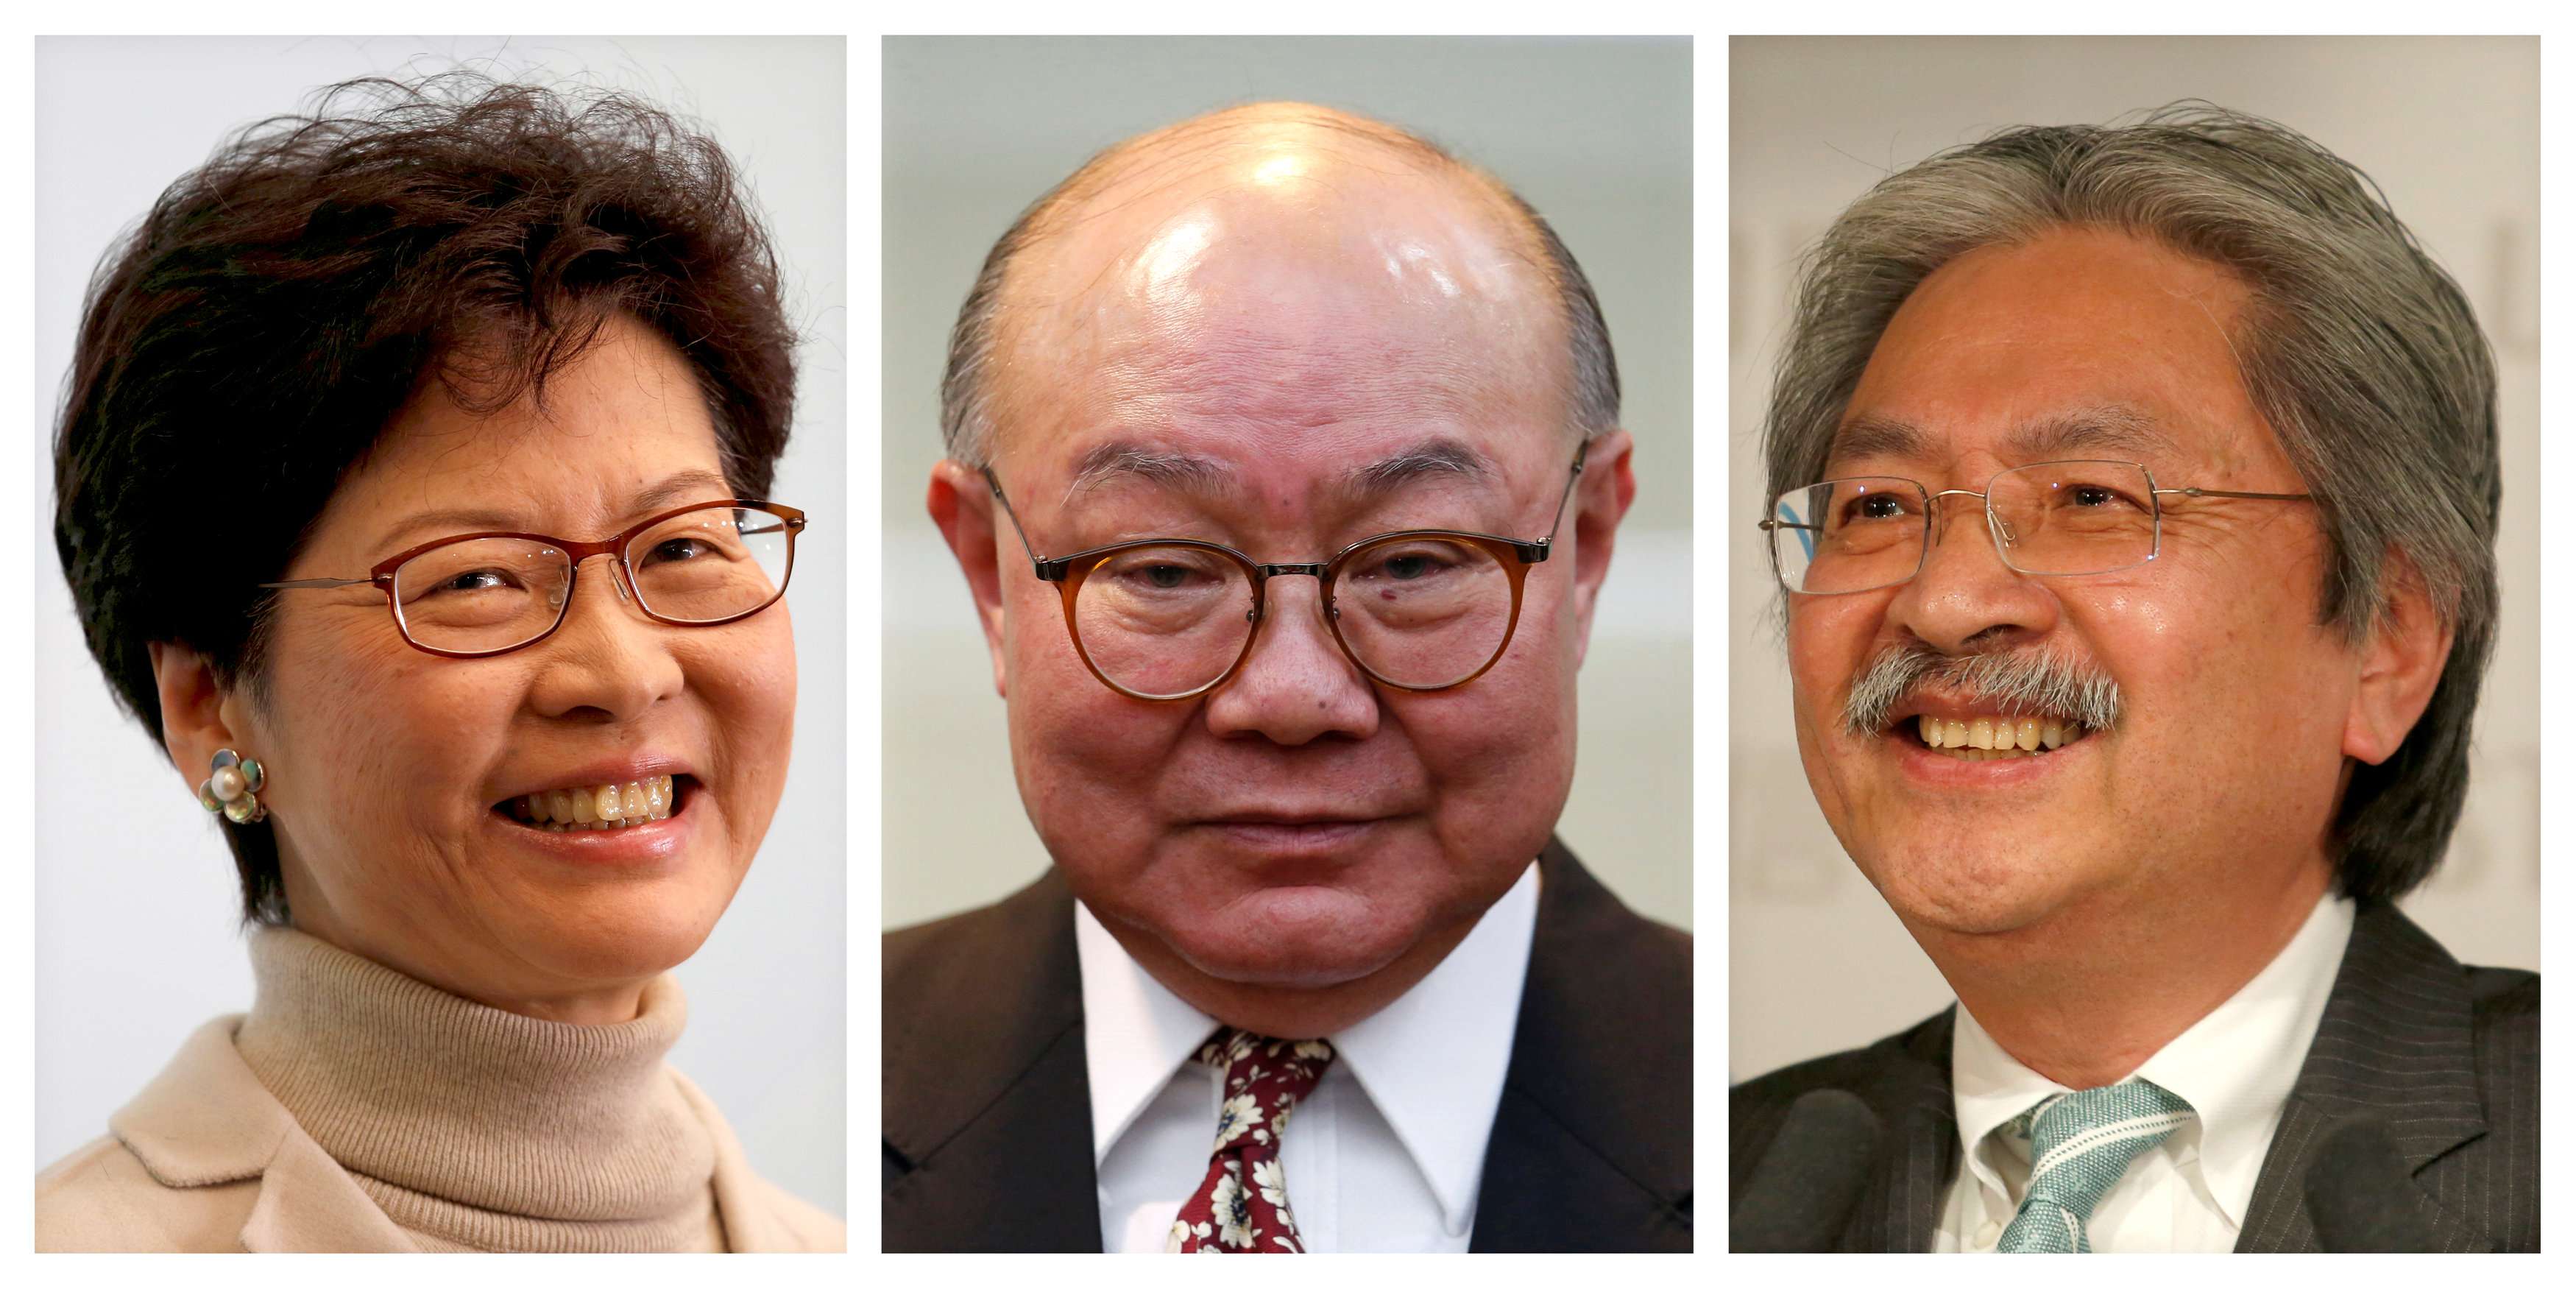 All three candidates – Carrie Lam, Woo Kwok-hing and John Tsang – have promised to mend the fissures in society if elected, and acknowledge that the relaunch of political reform is a contentious issue they have to address. Photo: Reuters